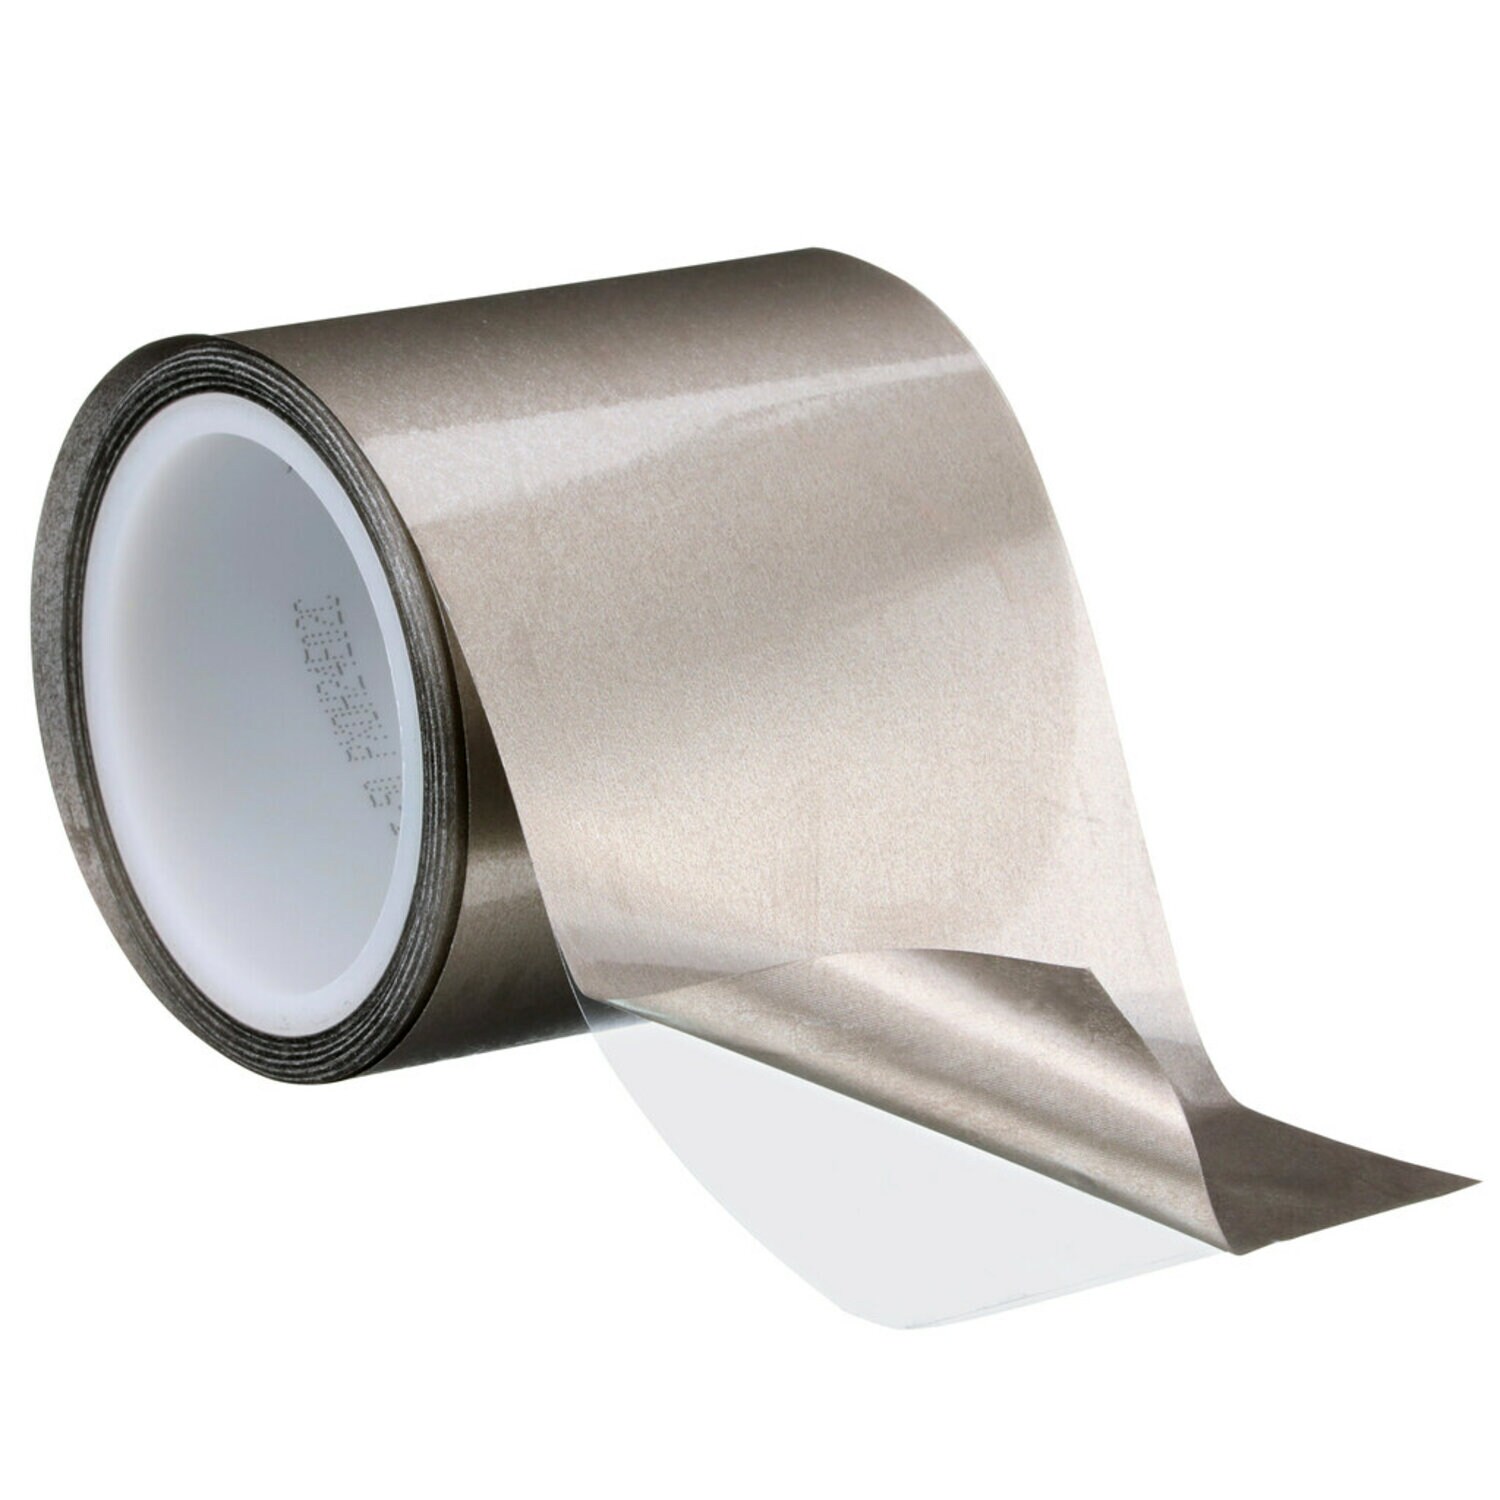 7100313598 - 3M Electrically Conductive Double-Sided Tape 5113DFT-50, Grey, 210 mm x 10 m, 4 Rolls/Case